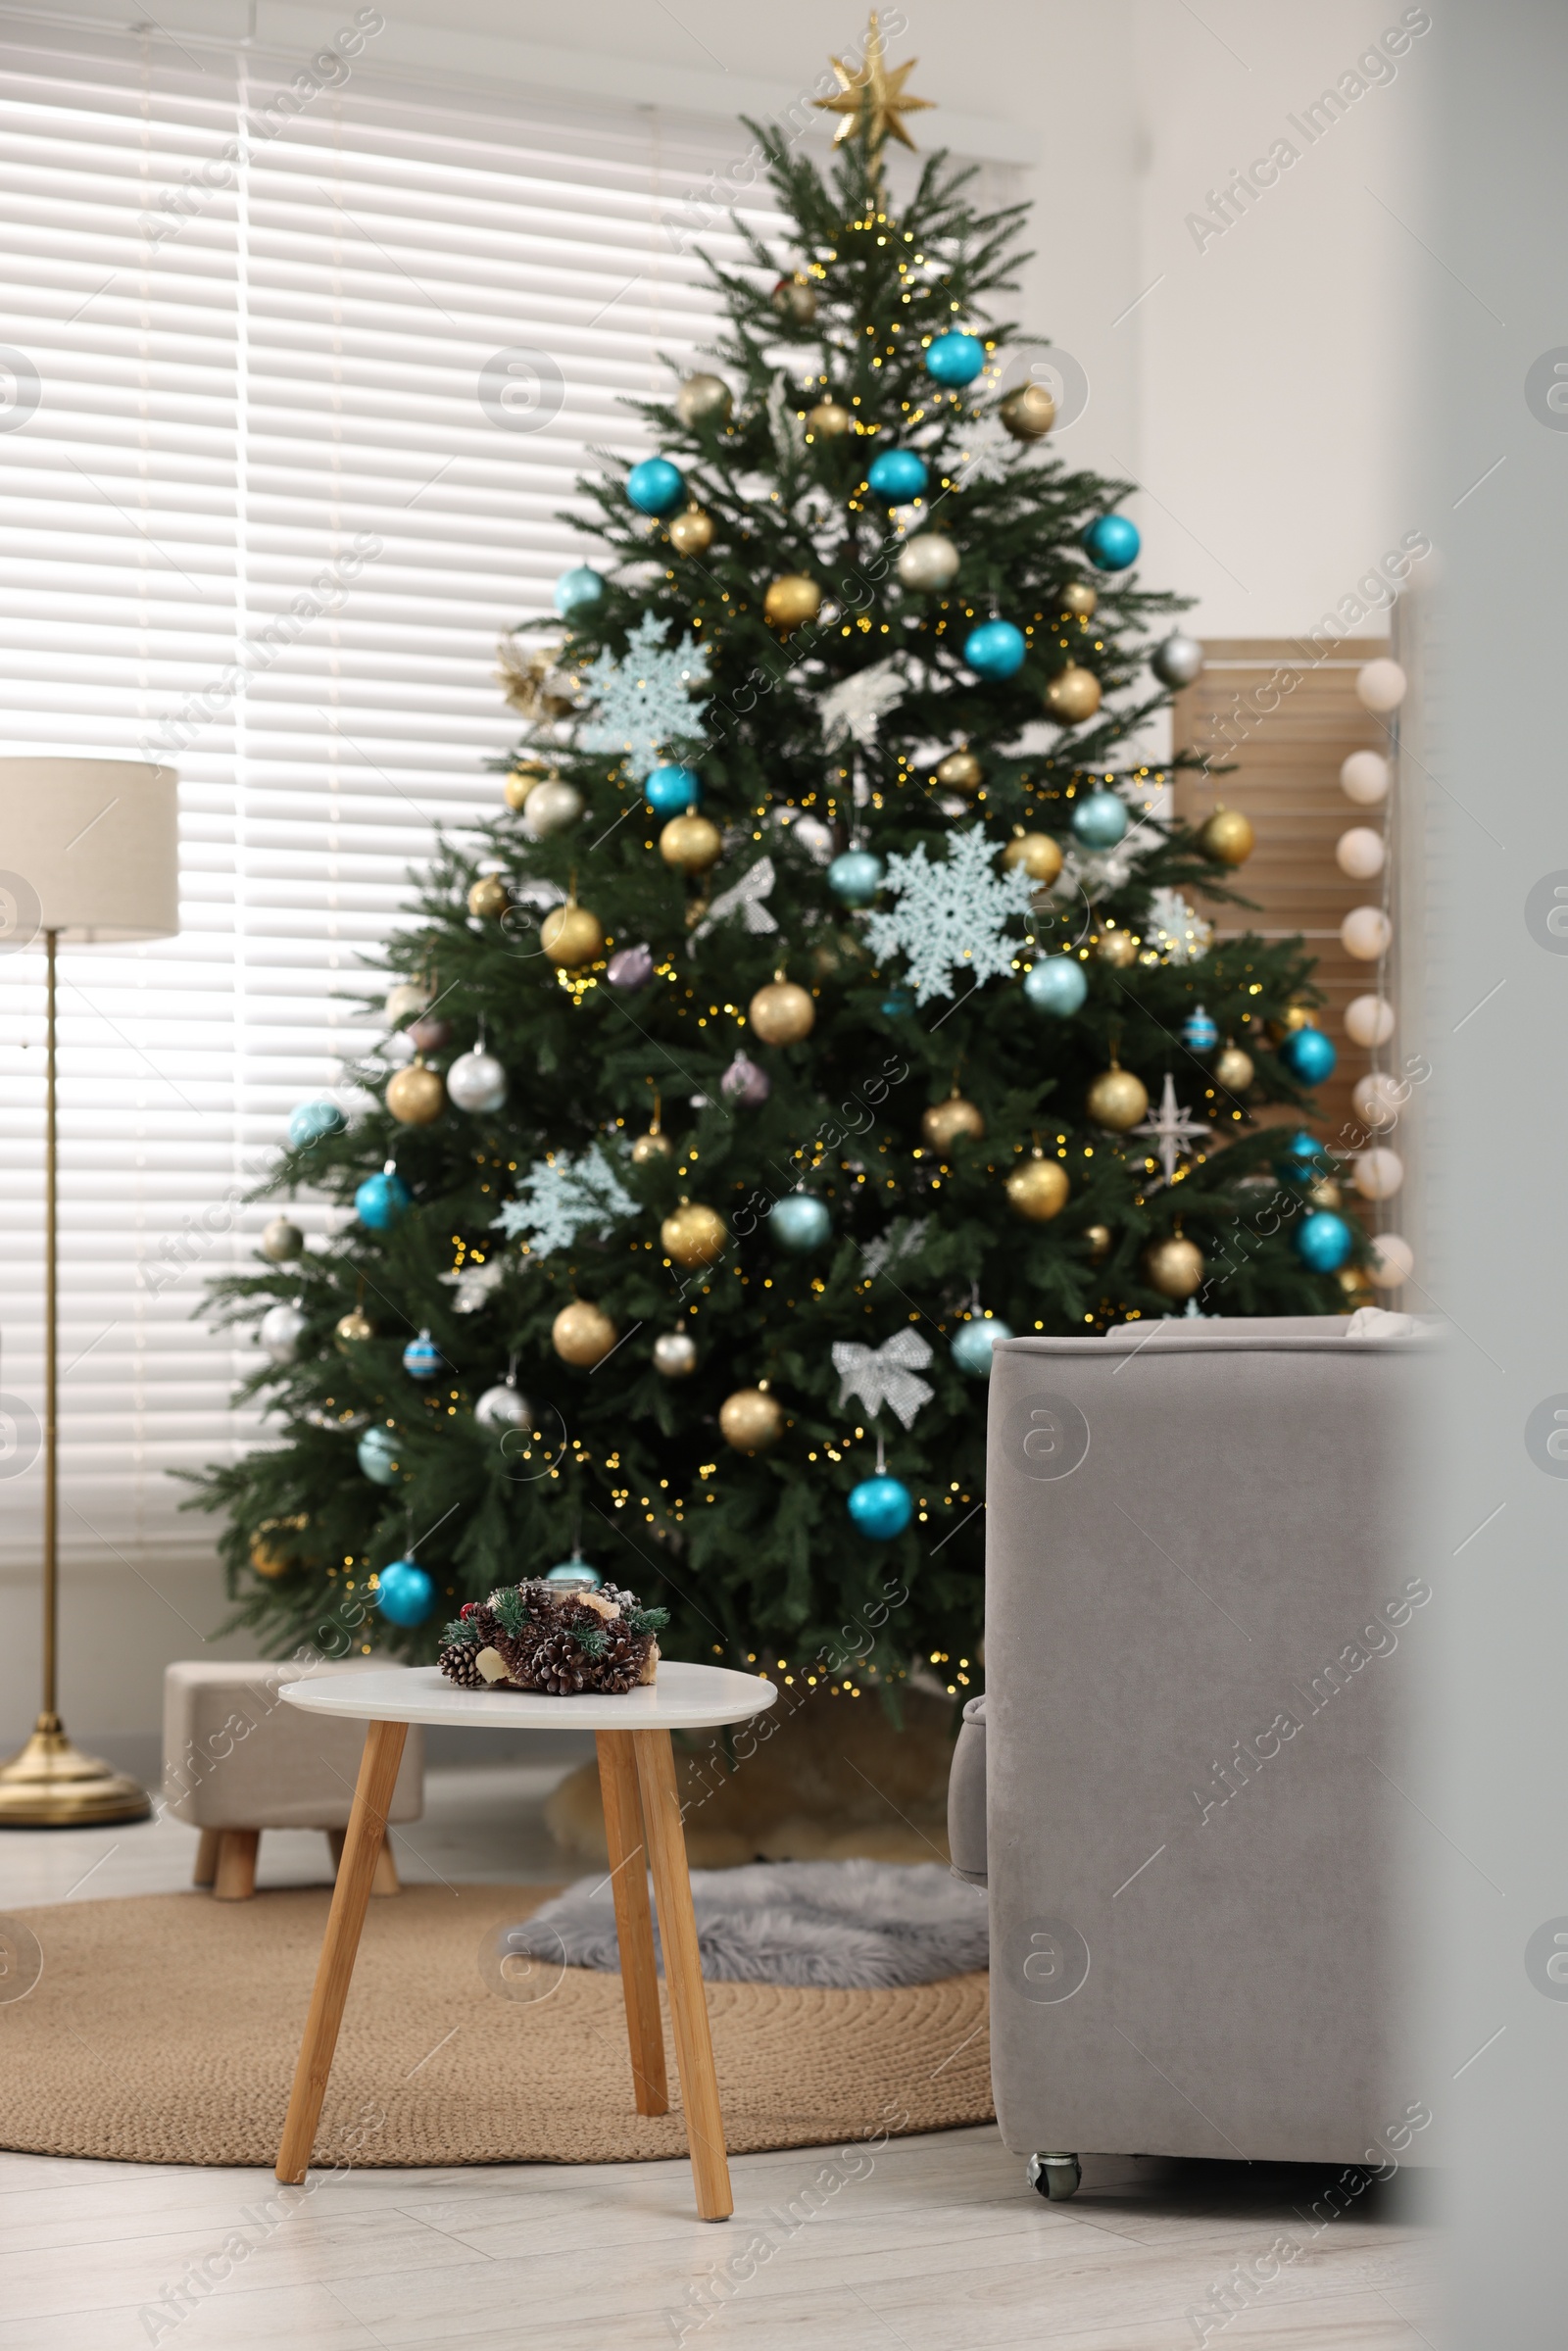 Photo of Christmas tree in room decorated for holiday. Festive interior design